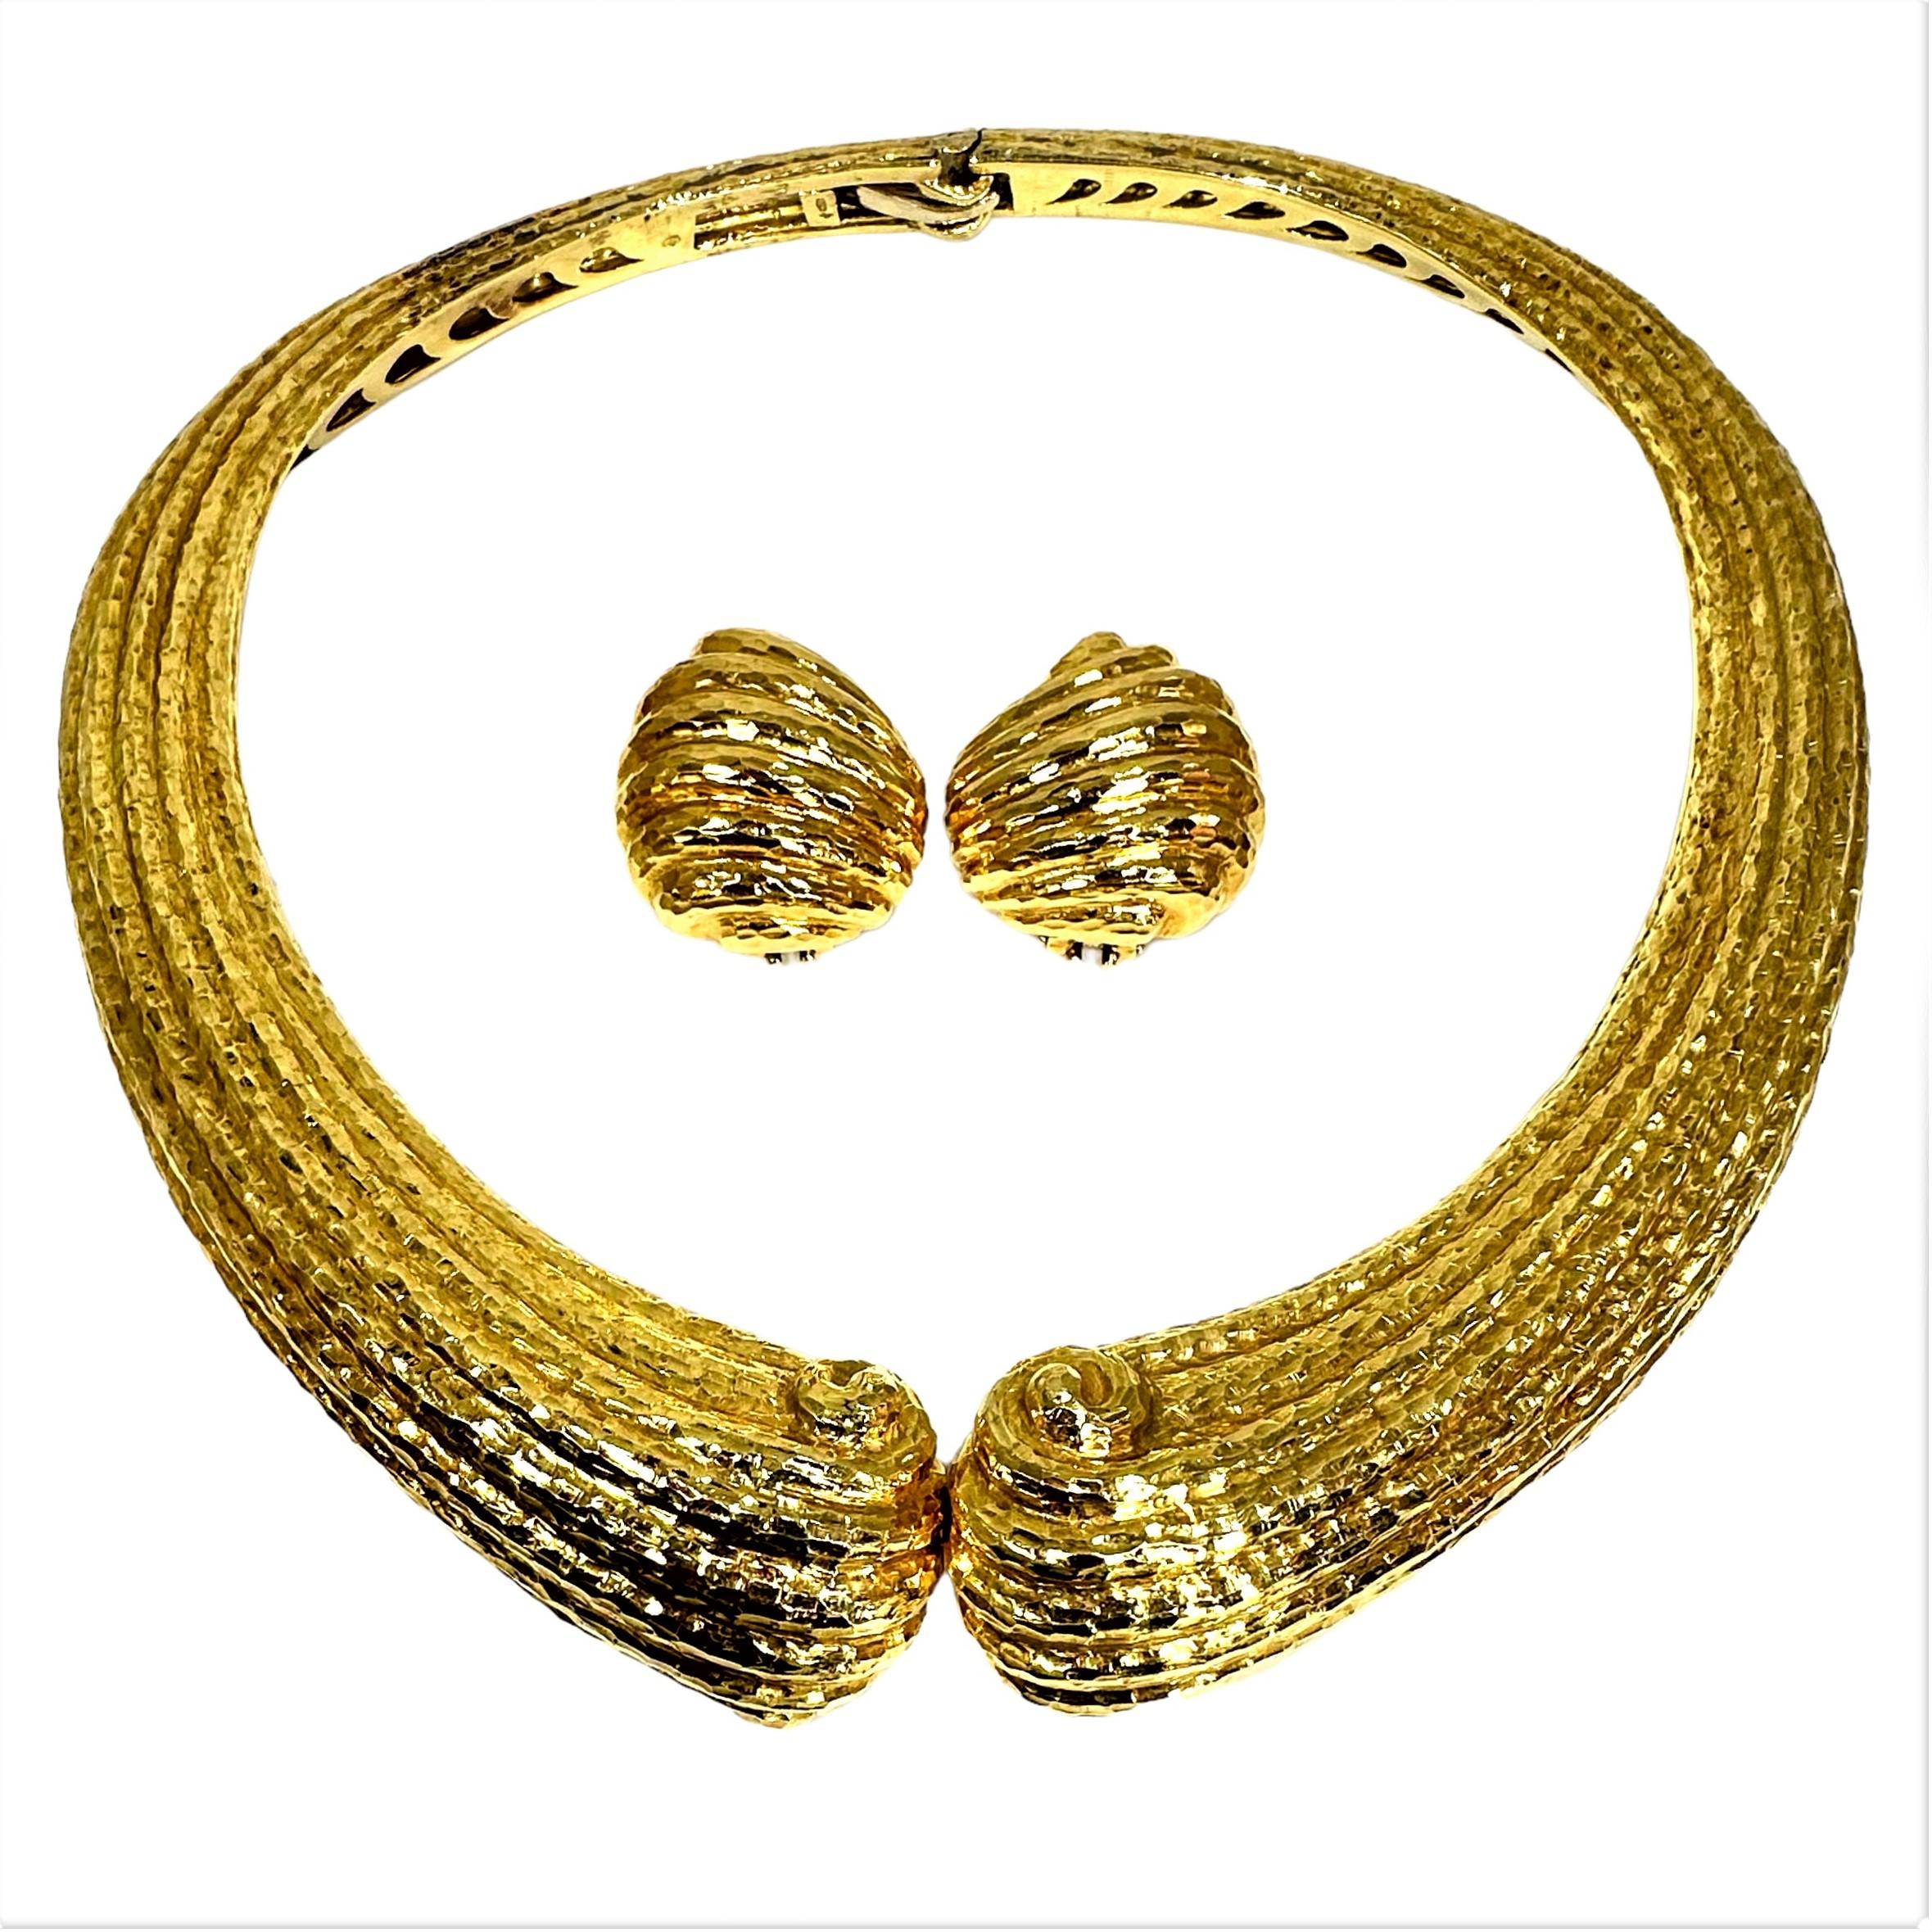 Massive 18K Yellow Gold, Hammered Finish, Italian Scroll Motif Choker Necklace For Sale 8